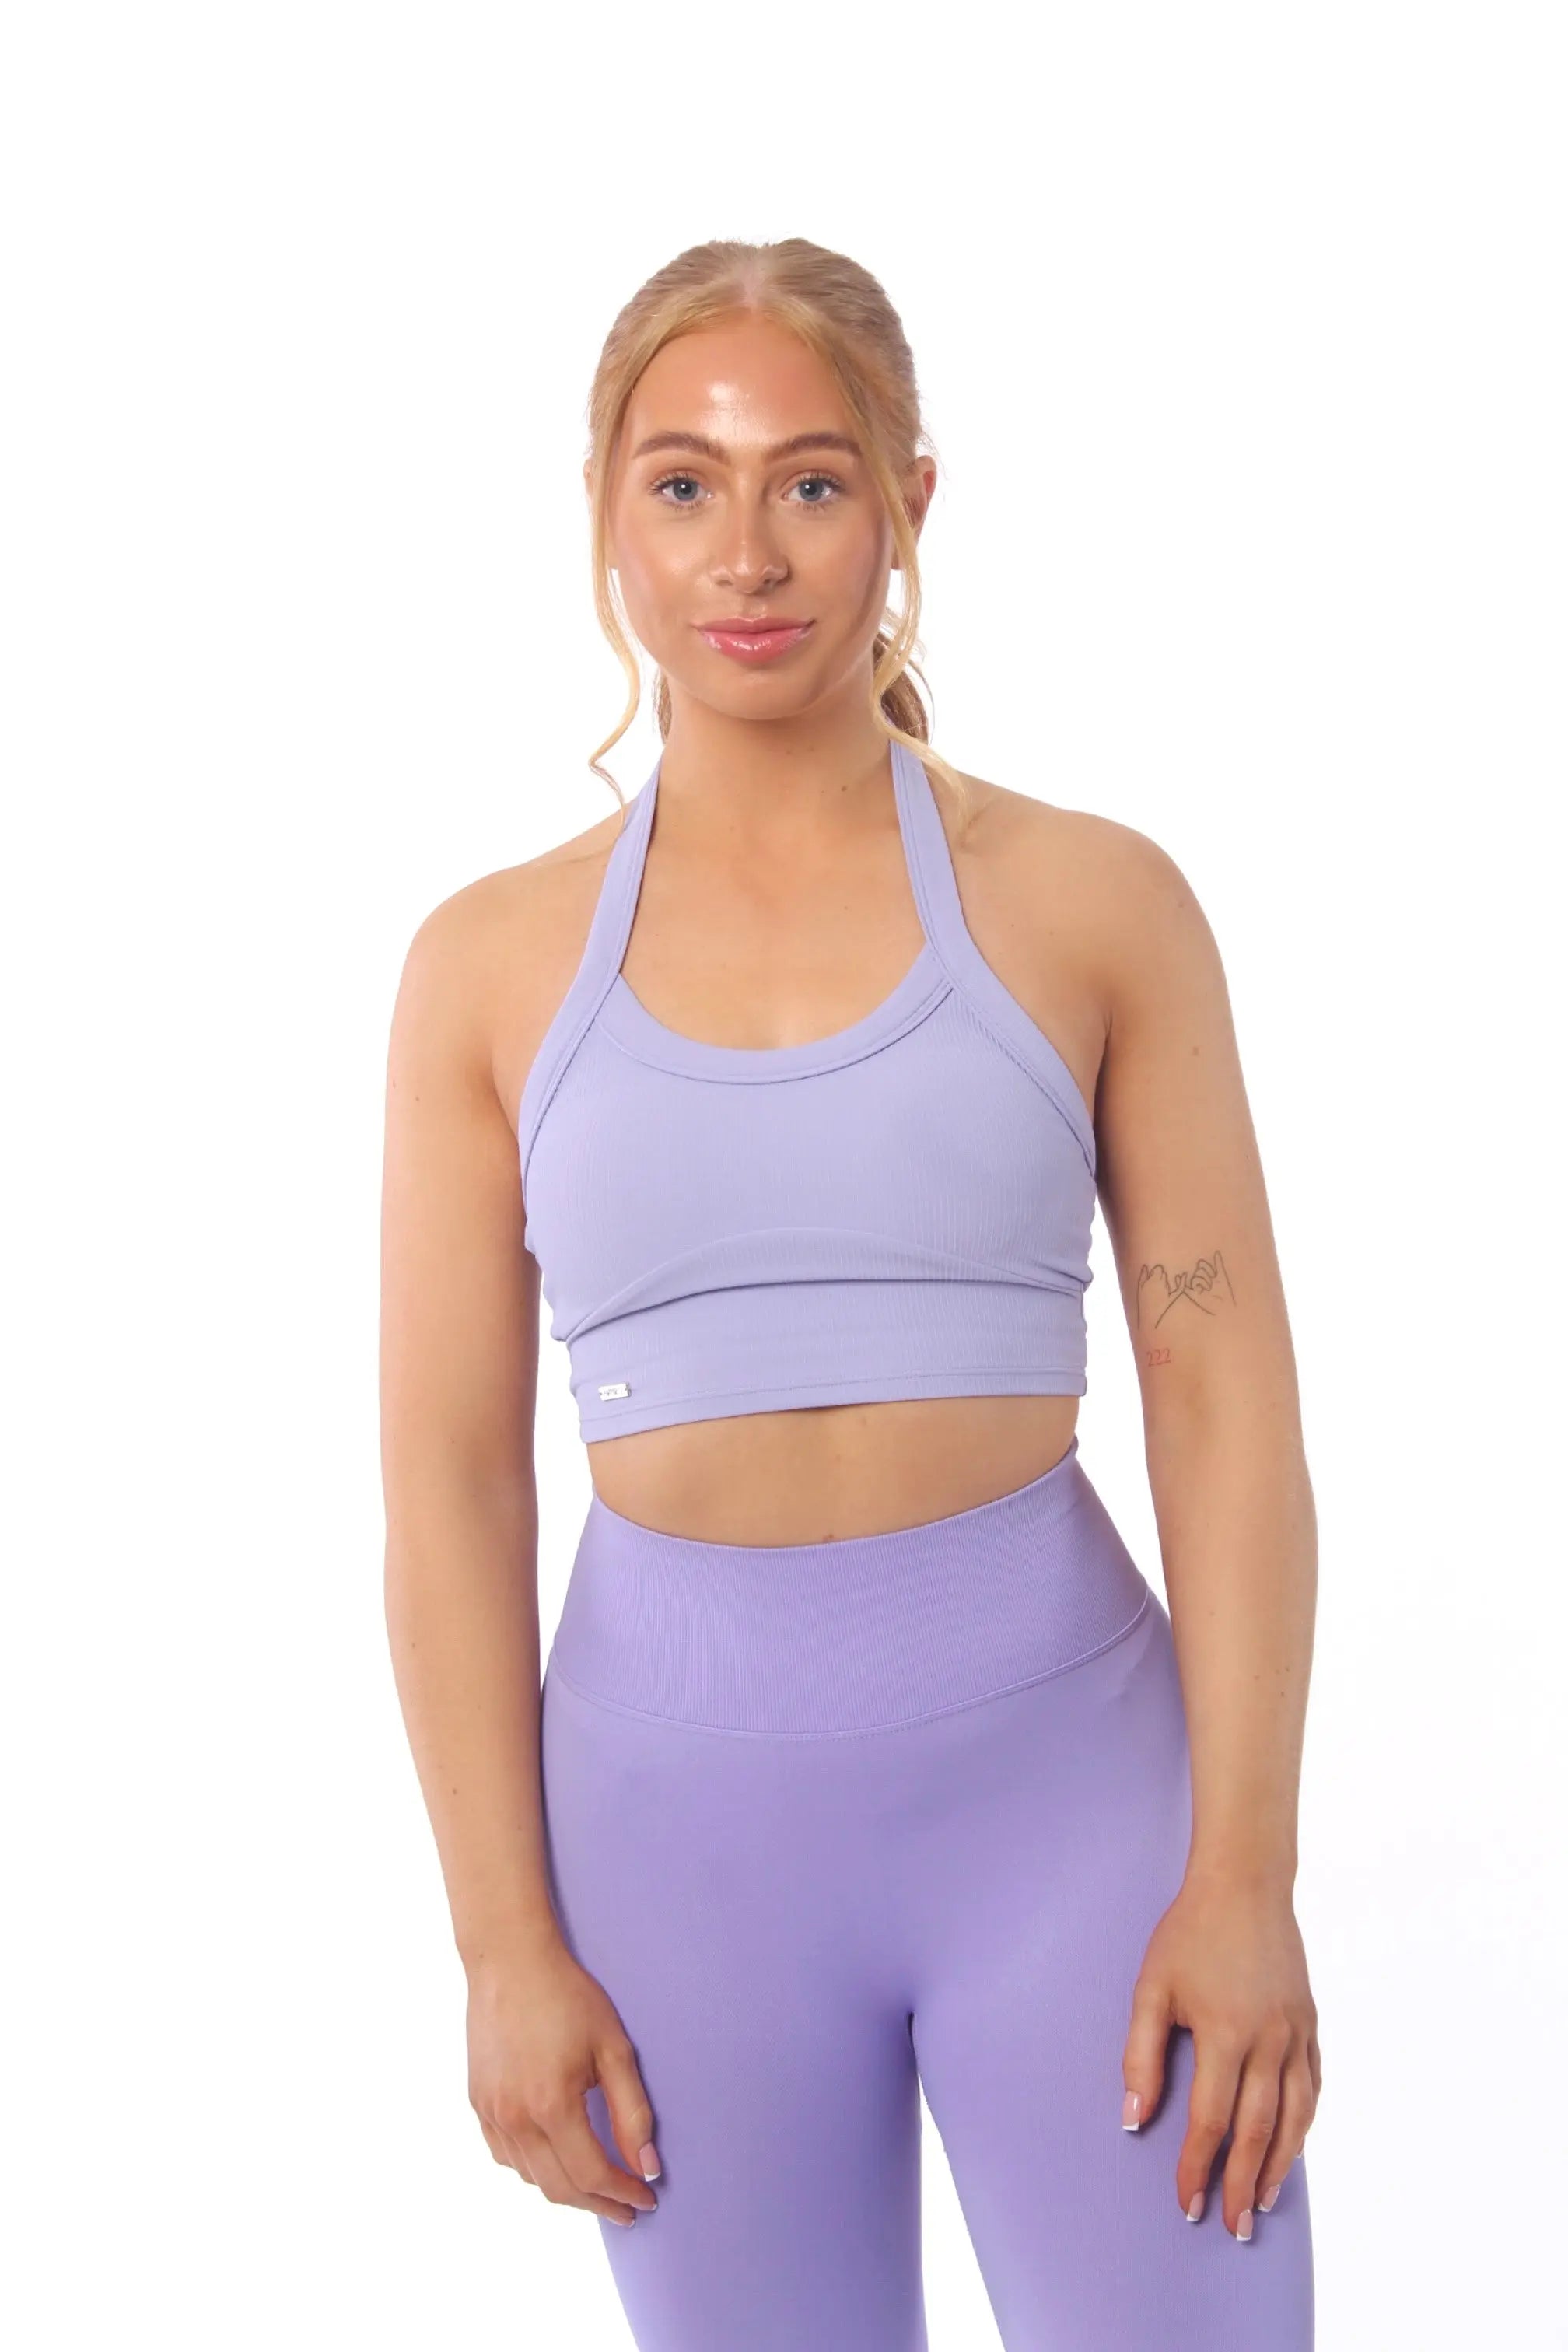 https://empowerclothing.co.uk/cdn/shop/files/Signature-Collection---Halter-Neck-Sports-Bra-in-Lilac-with-built-in-support-Empowerclothingltd-Empowerclothingltd-1684499539.jpg?v=1684499545